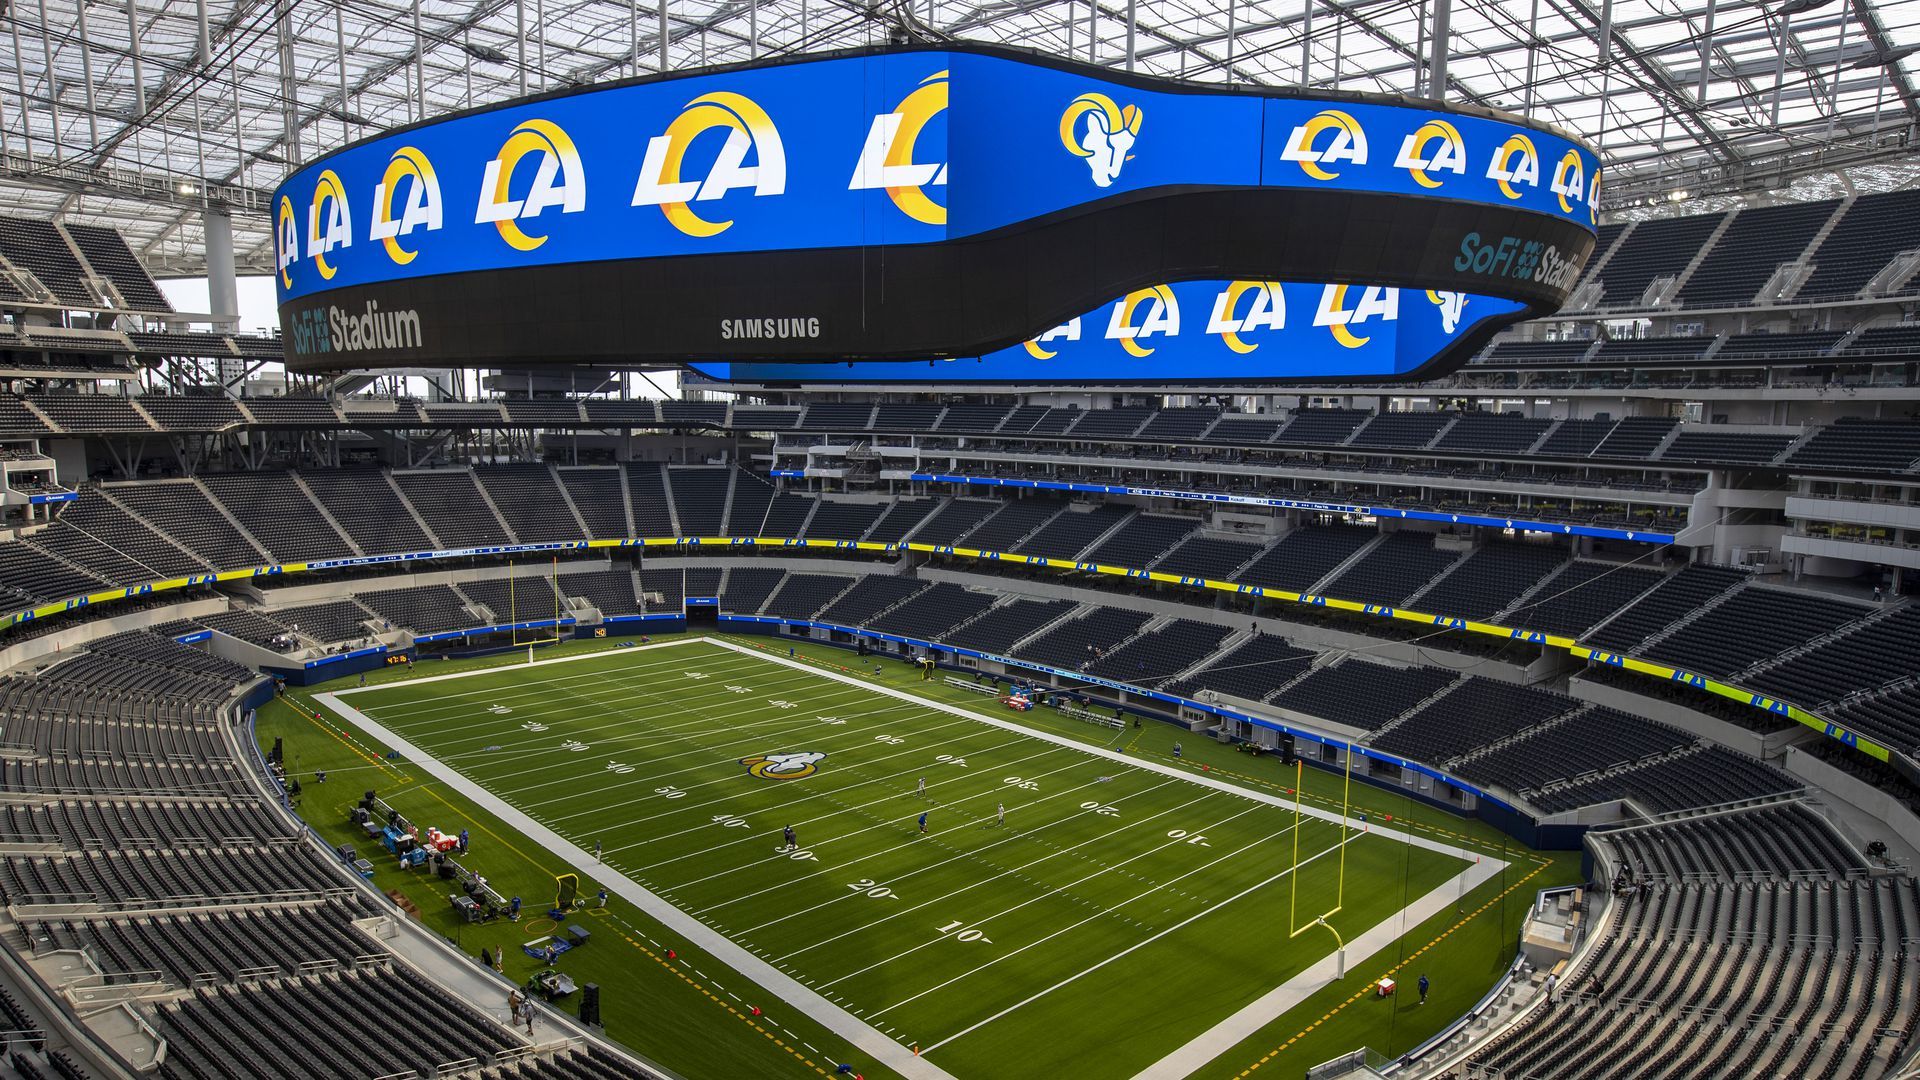 6 things to know about California's SoFi Stadium, the site of